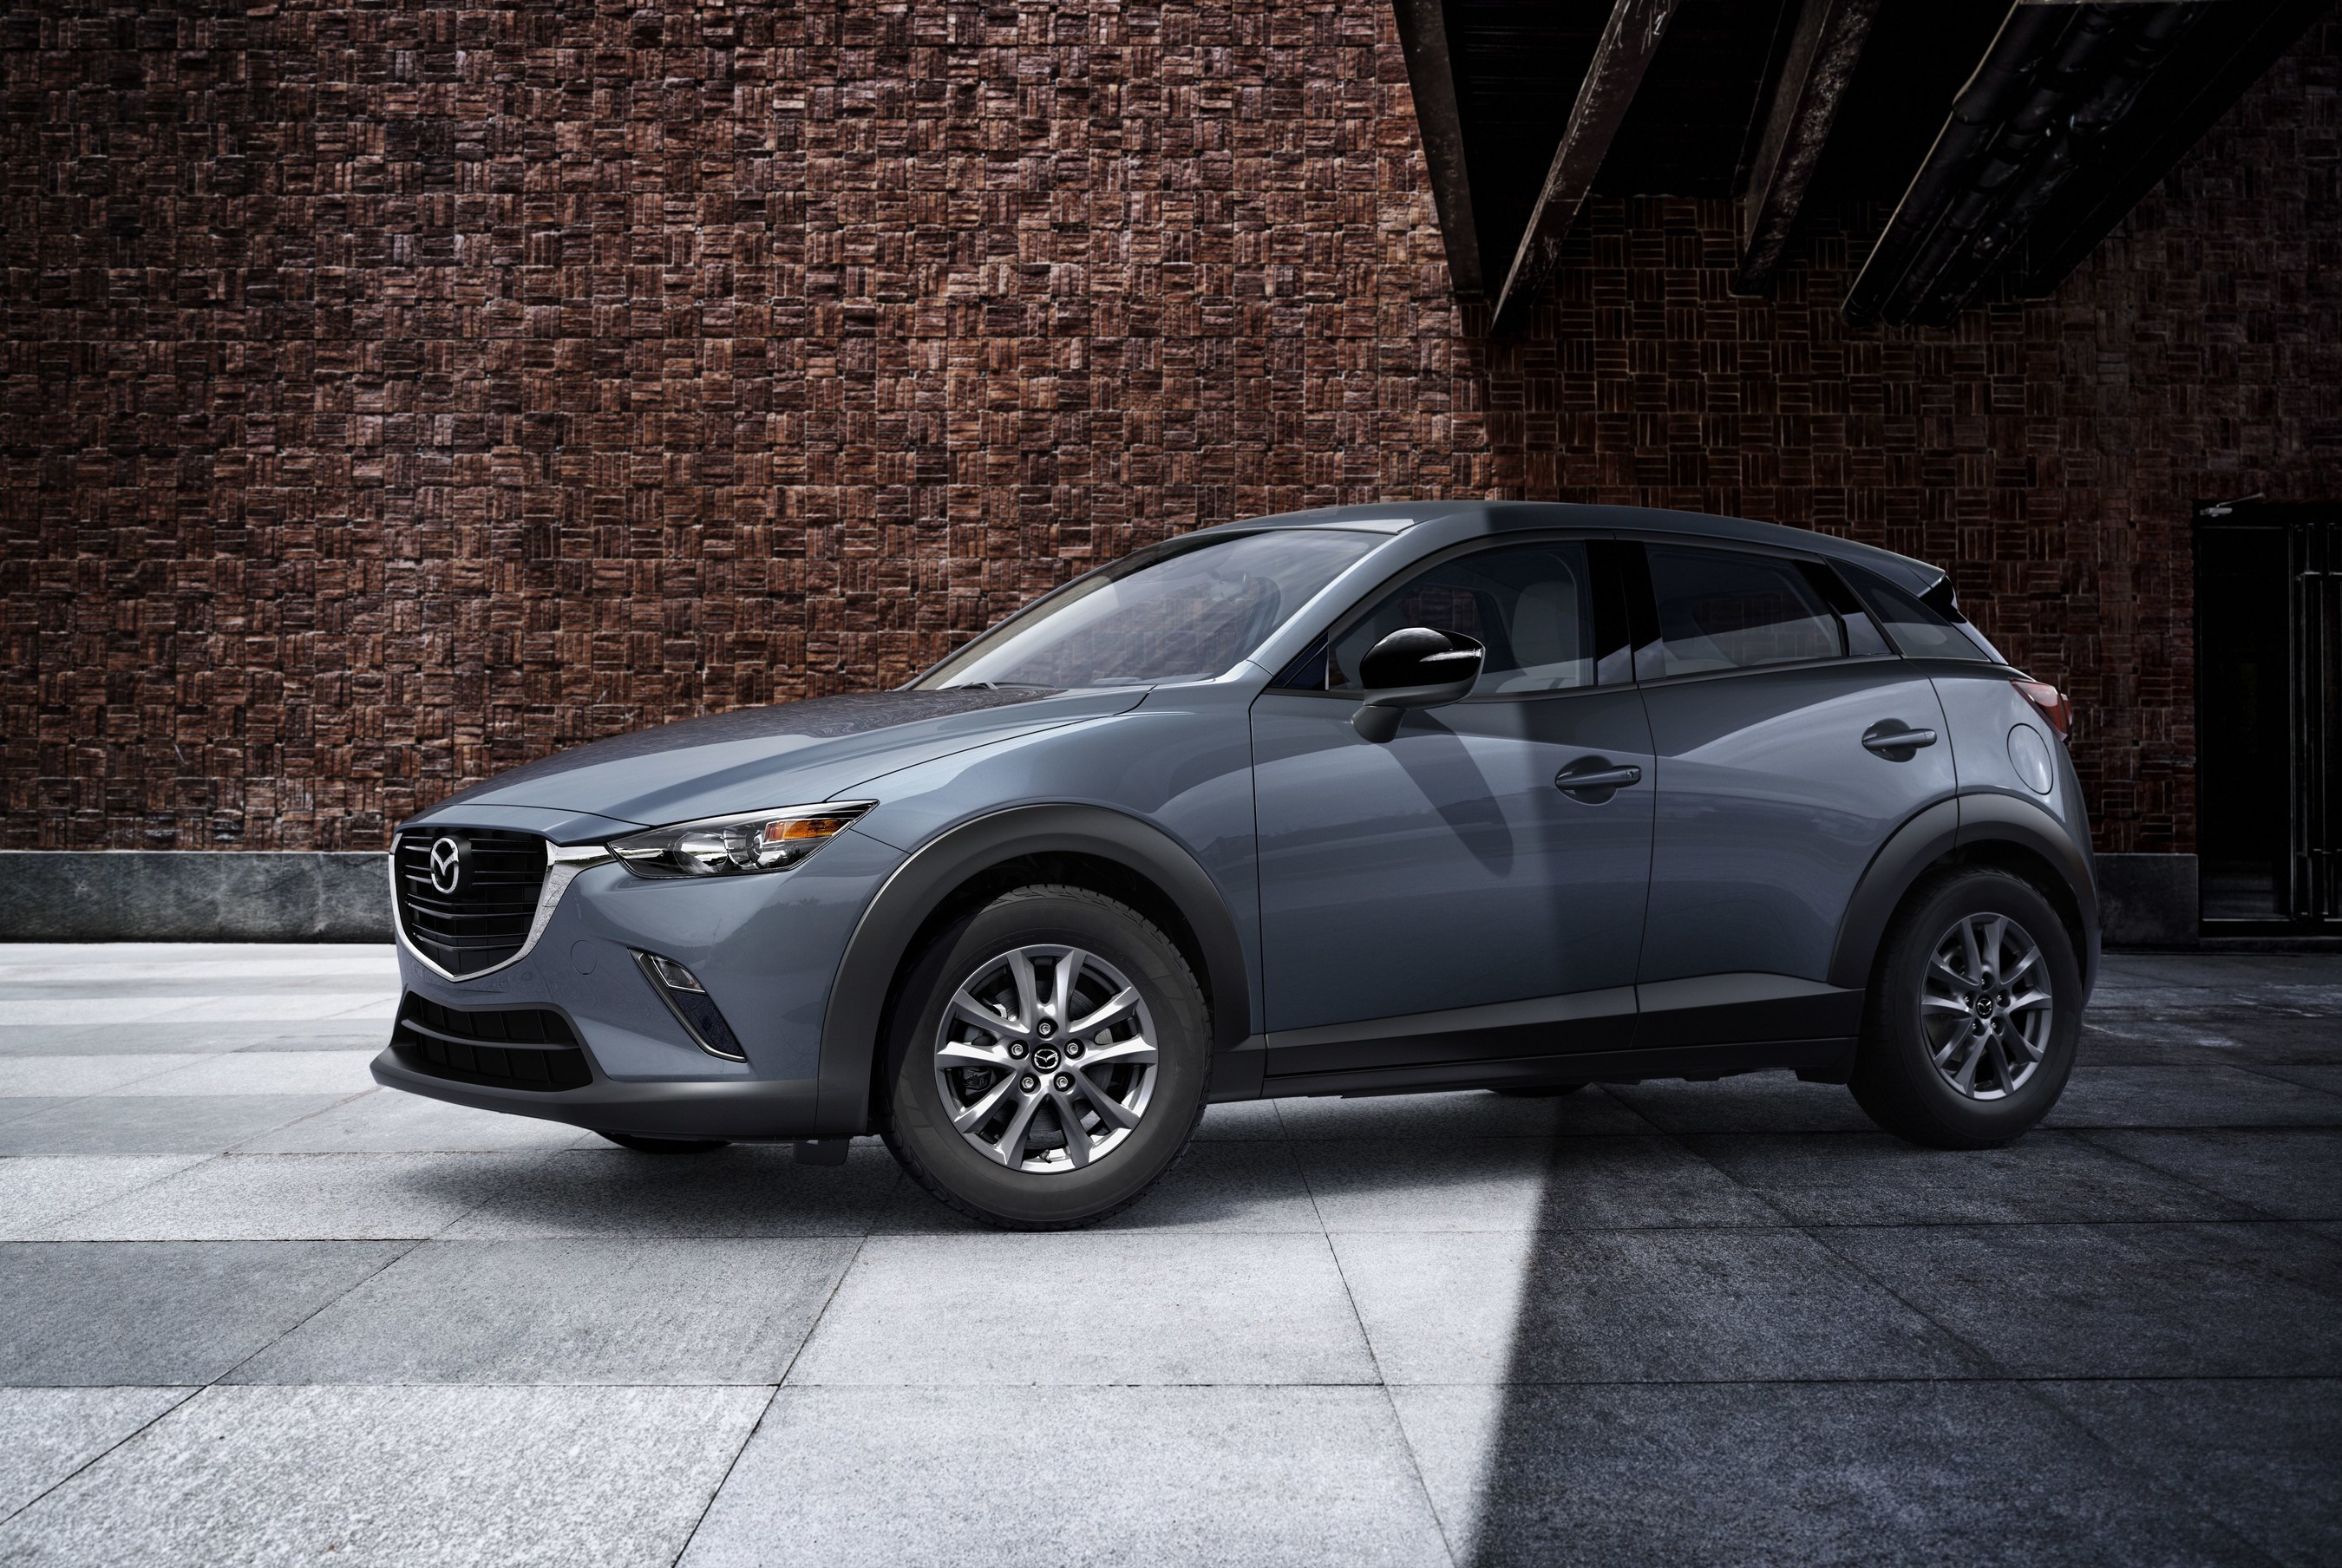 2021 Mazda CX-3: Dynamic Driving in a Subcompact Package - Aug 11, 2020